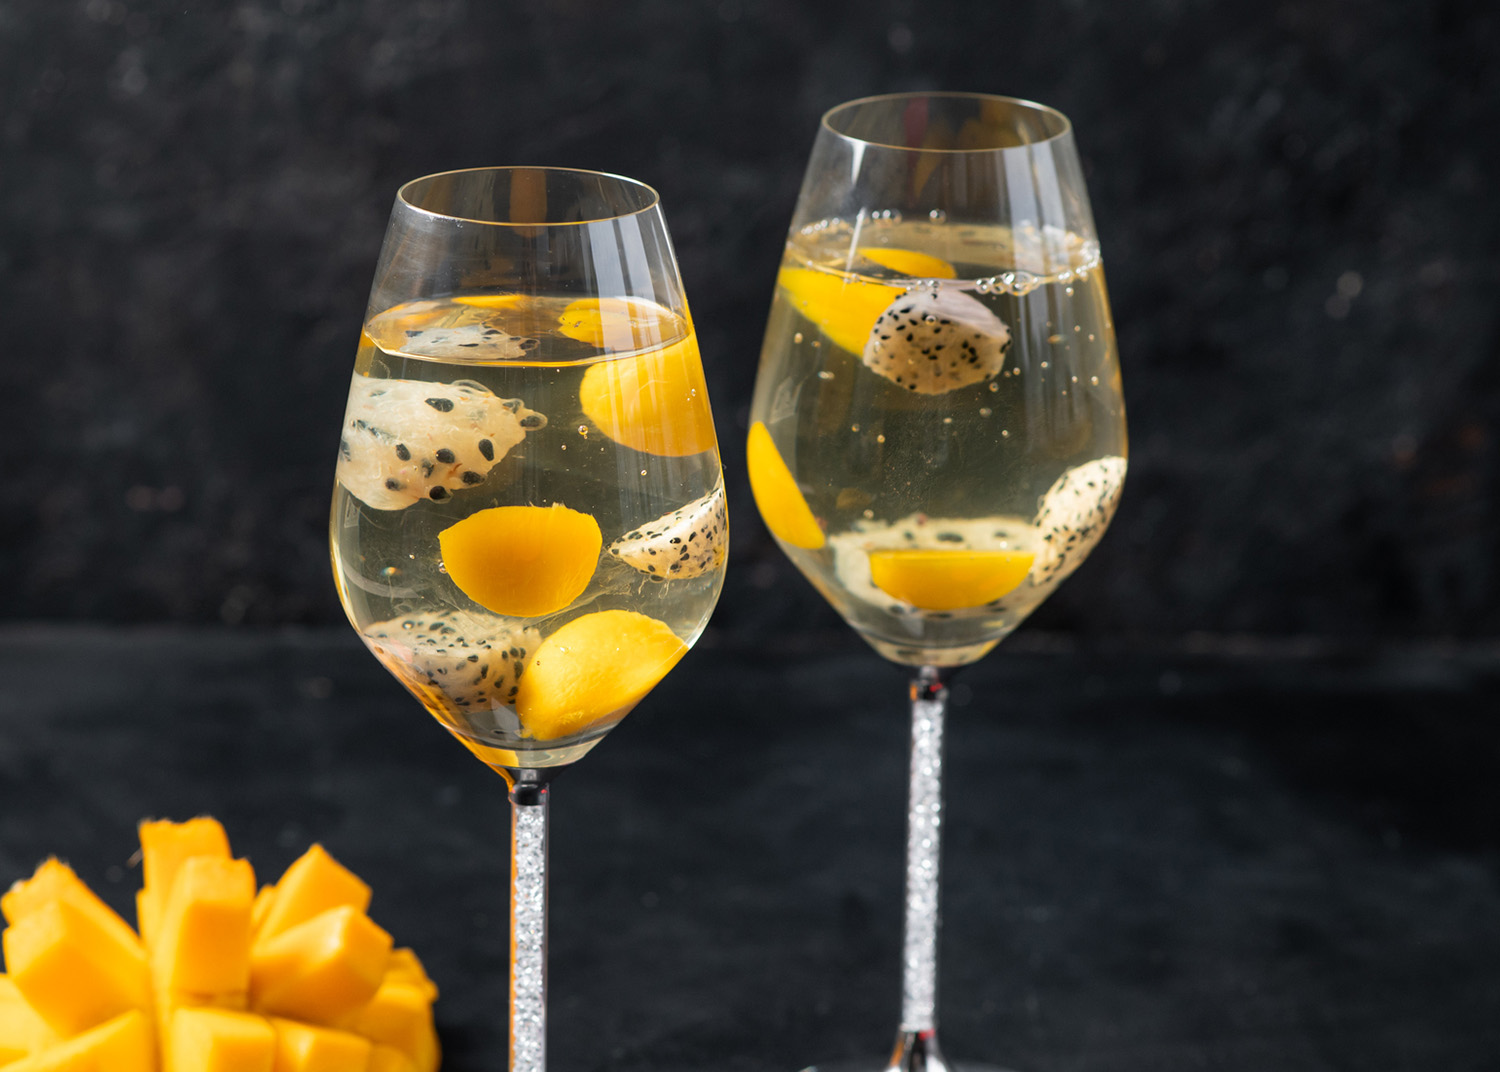 Dessert champagne jelly with exotic fruits - mango and pitahaya in a glass. On a black background